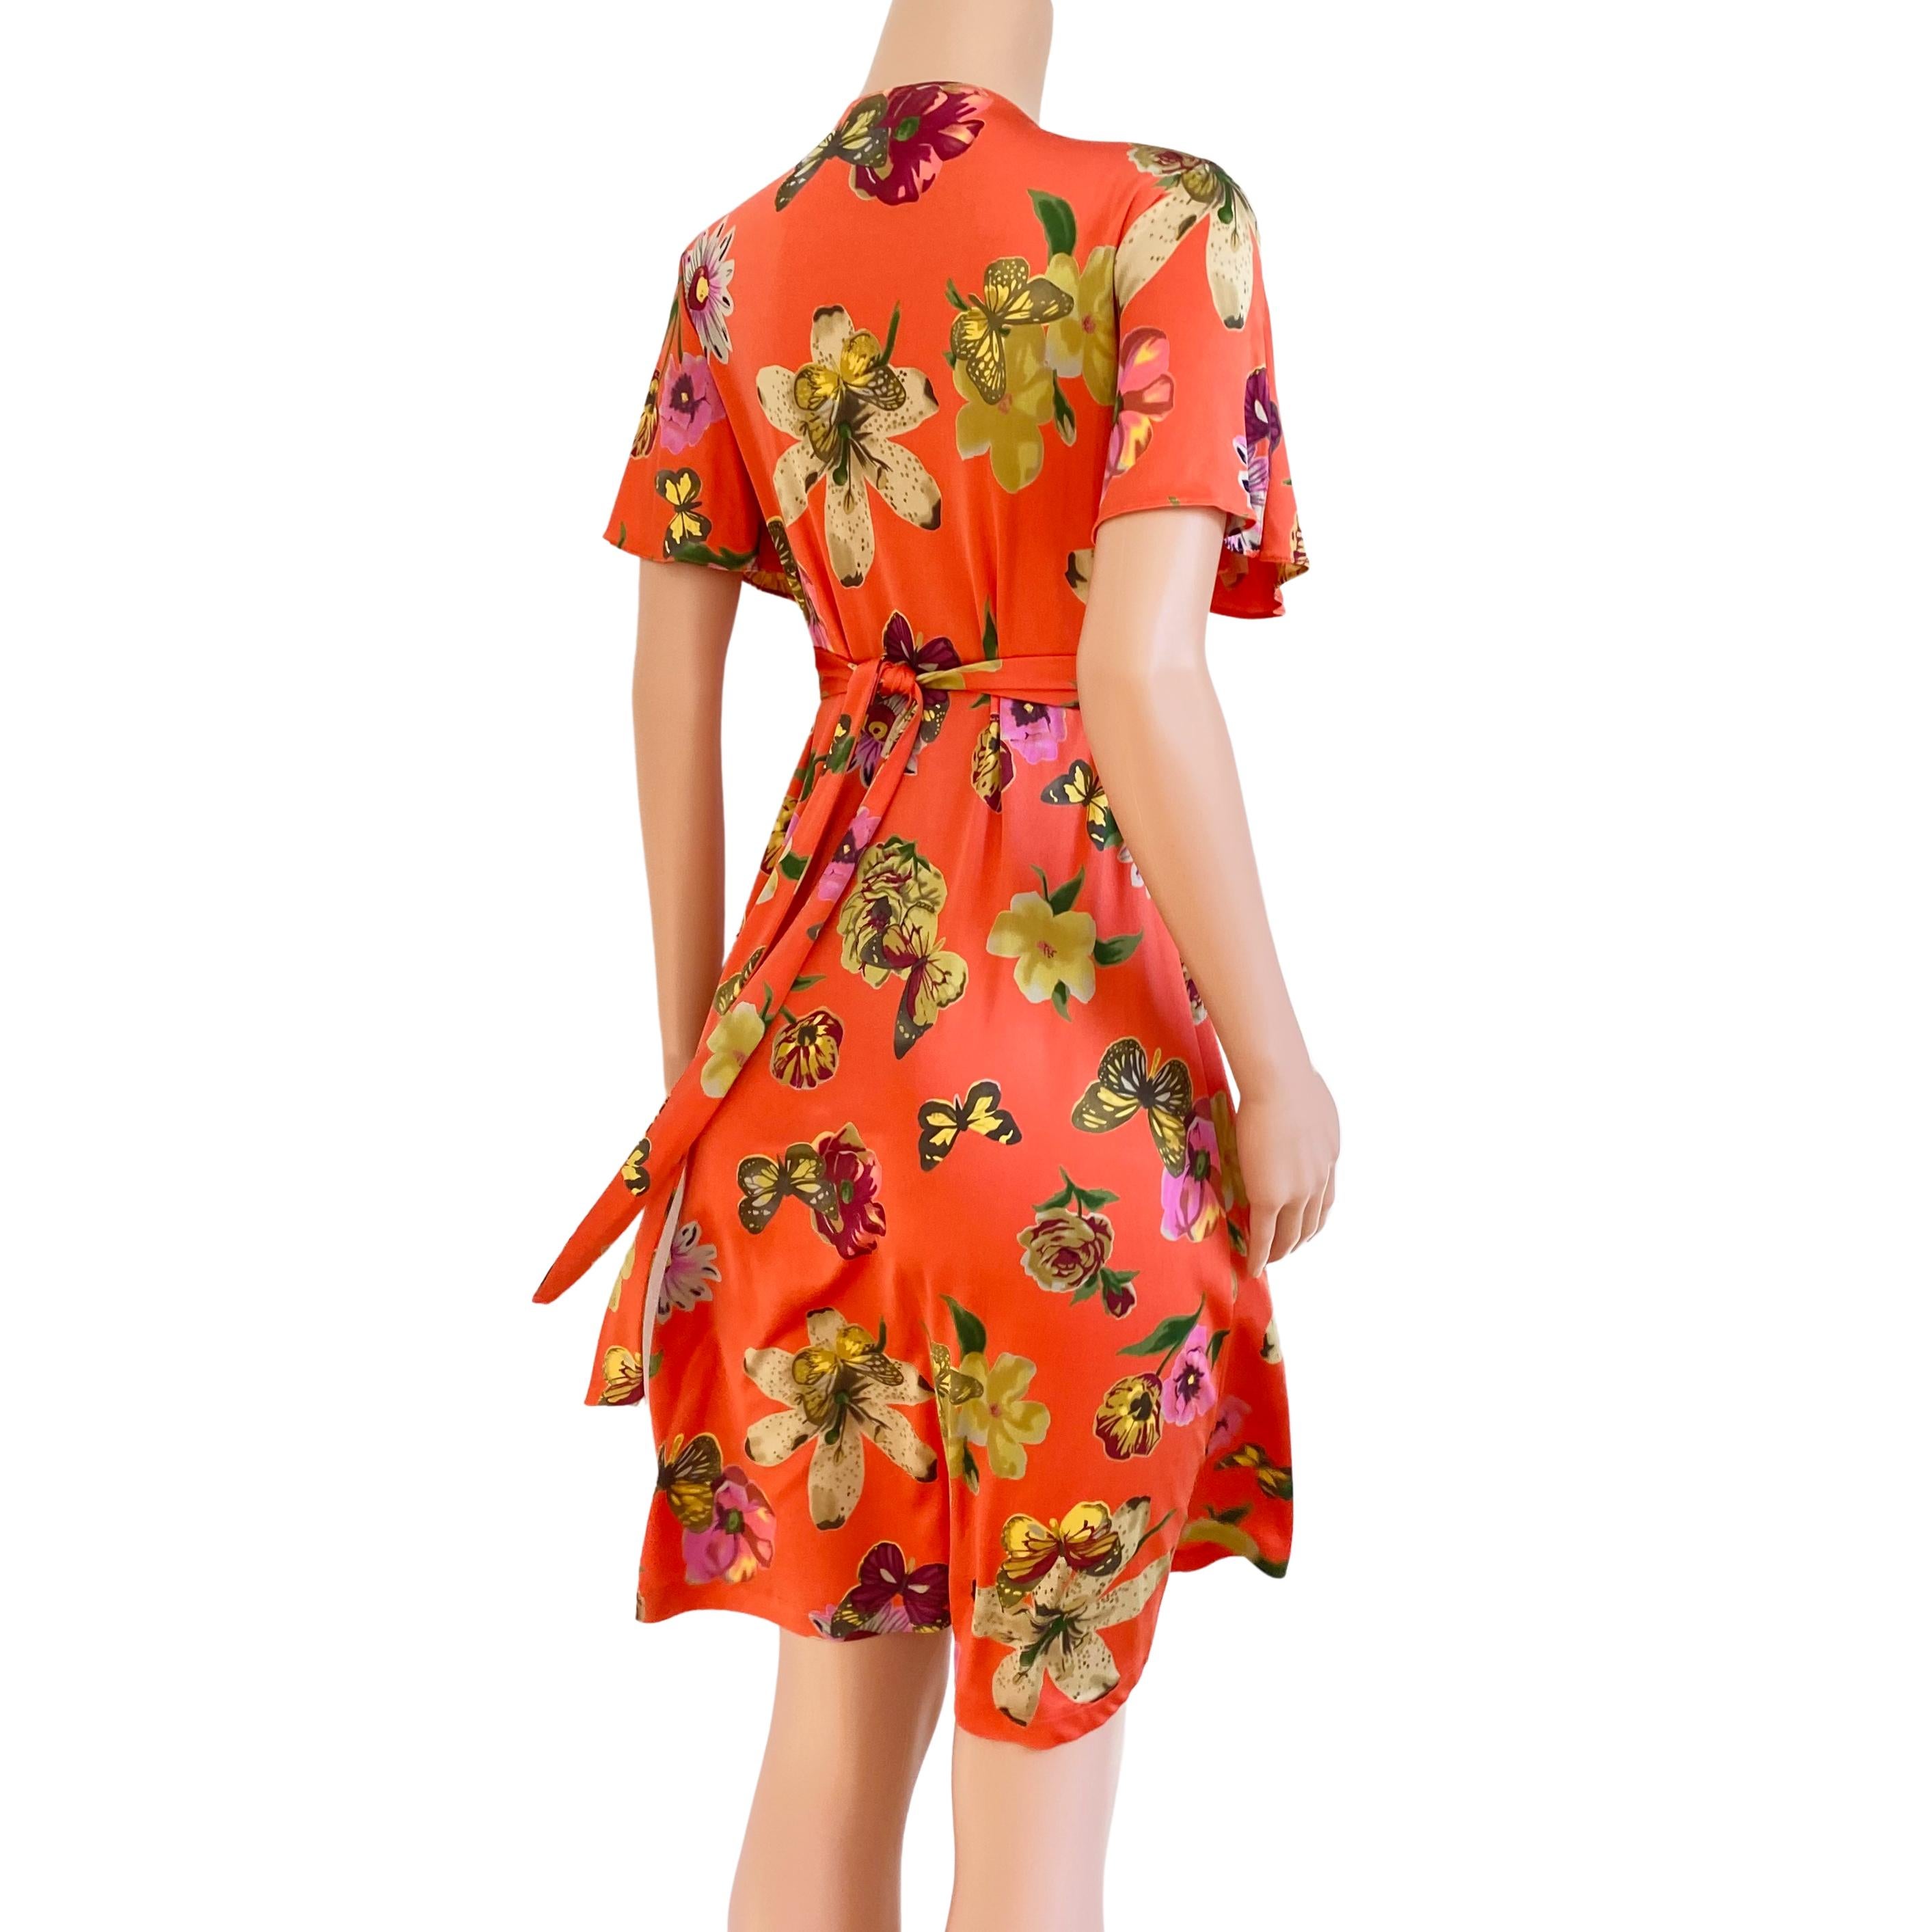 Condition: NEW WITH TAG.
Realistic floral print.
Wraparound belt ties for a perfect fit.
Flared sleeve splits to create even more volume.
Lots of movement in the flare skirt.
Approximately 40